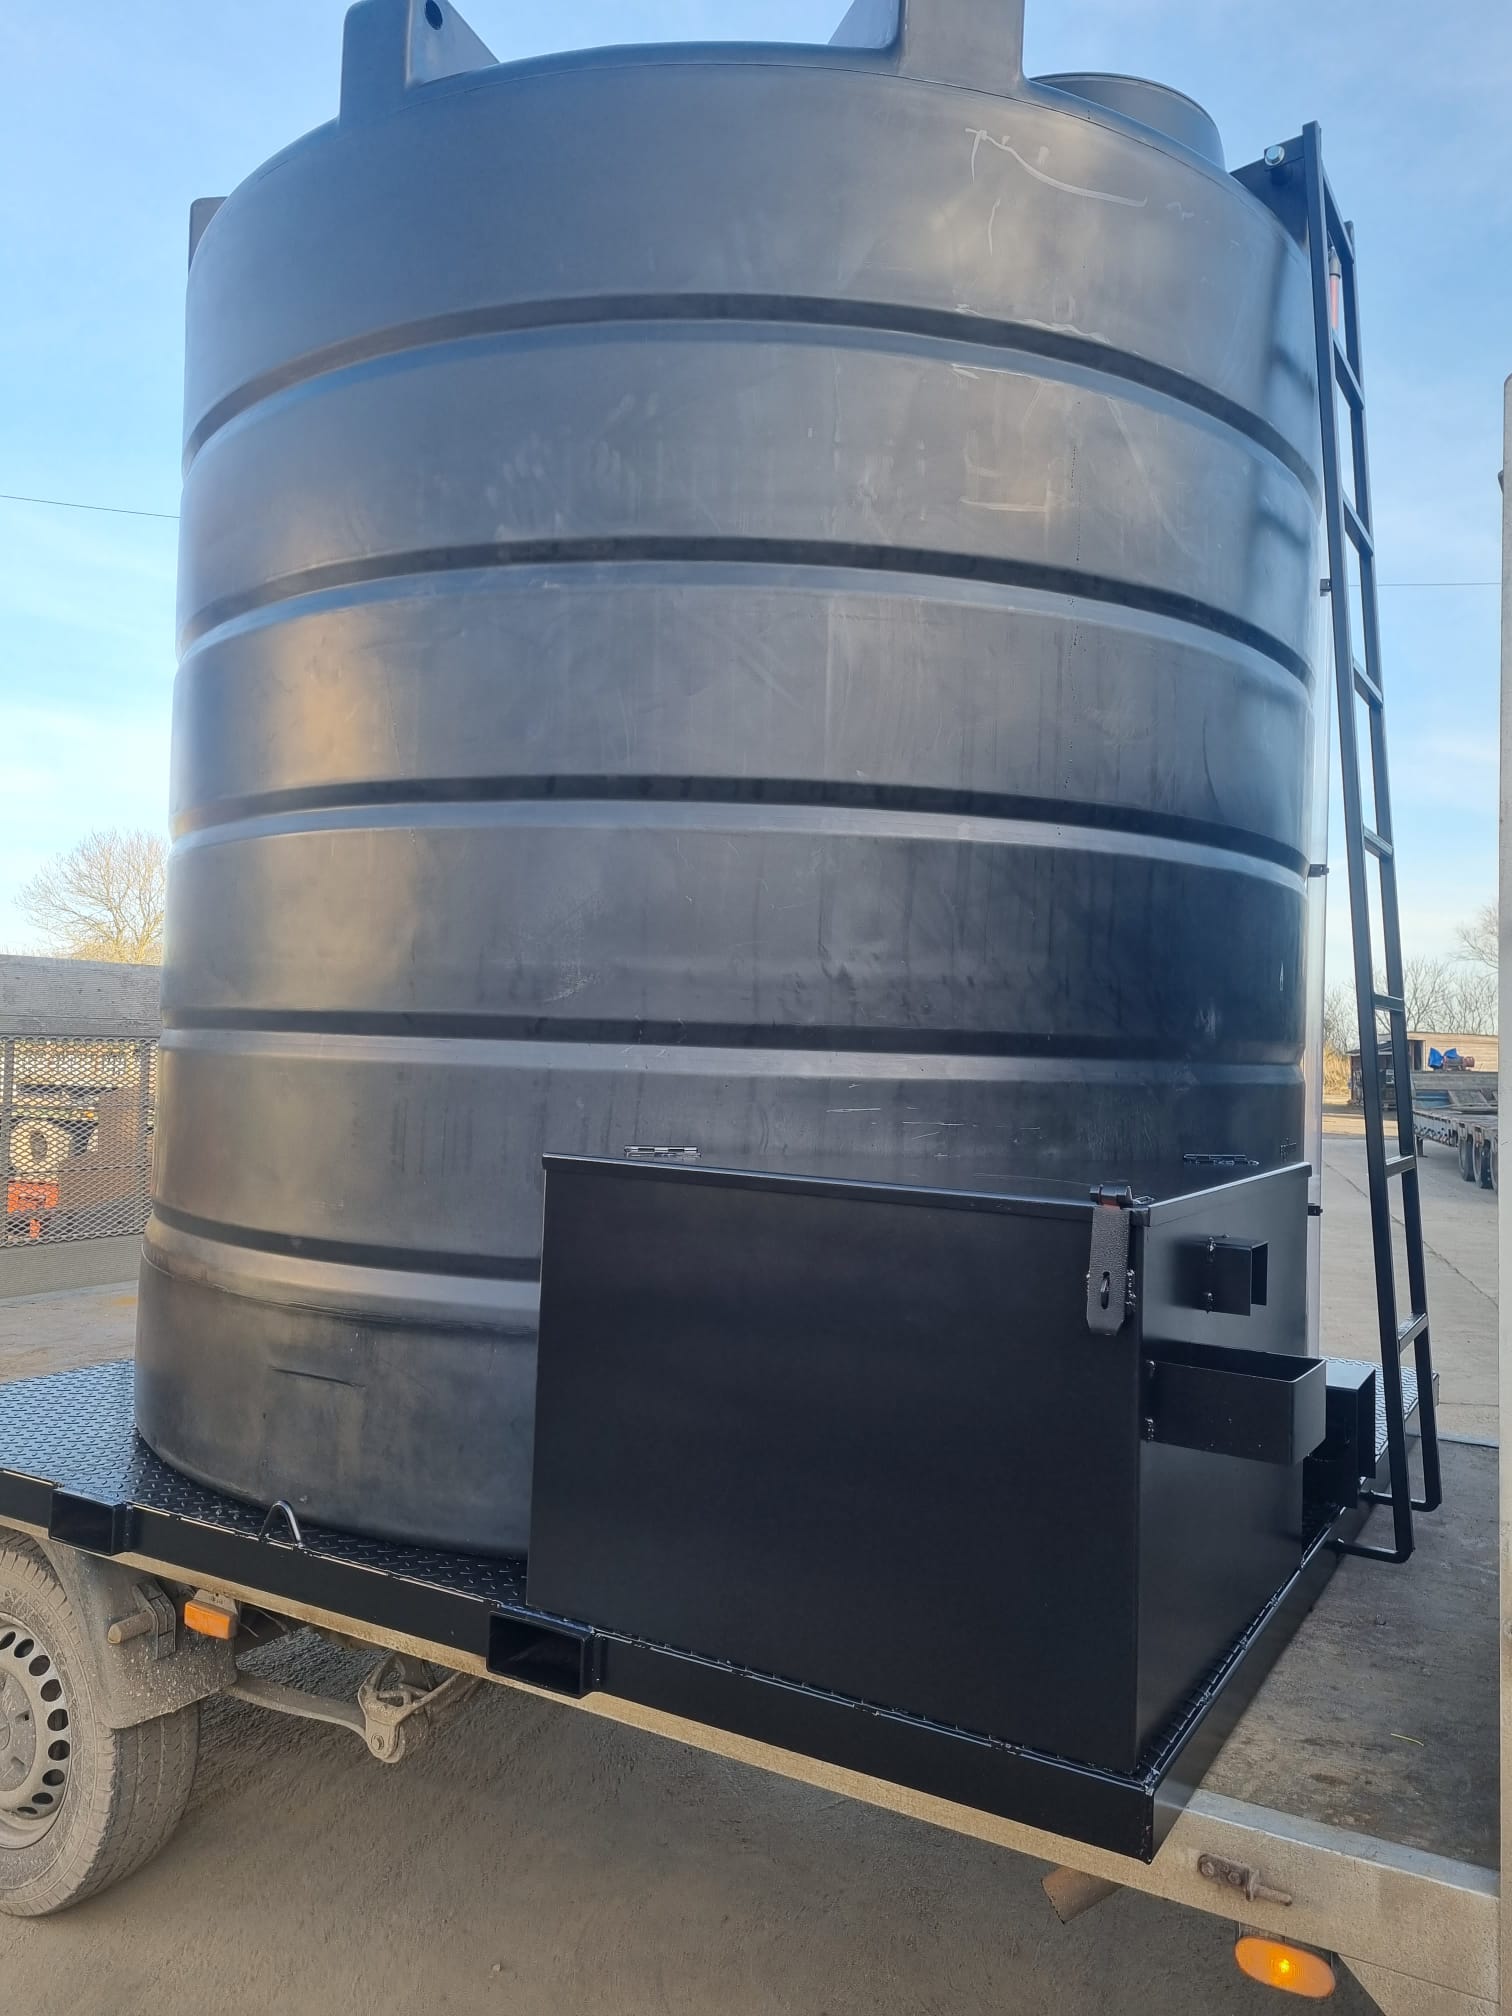 Affordable 10,000ltr Water Tank, With On Demand Pump To Hire In Peterborough